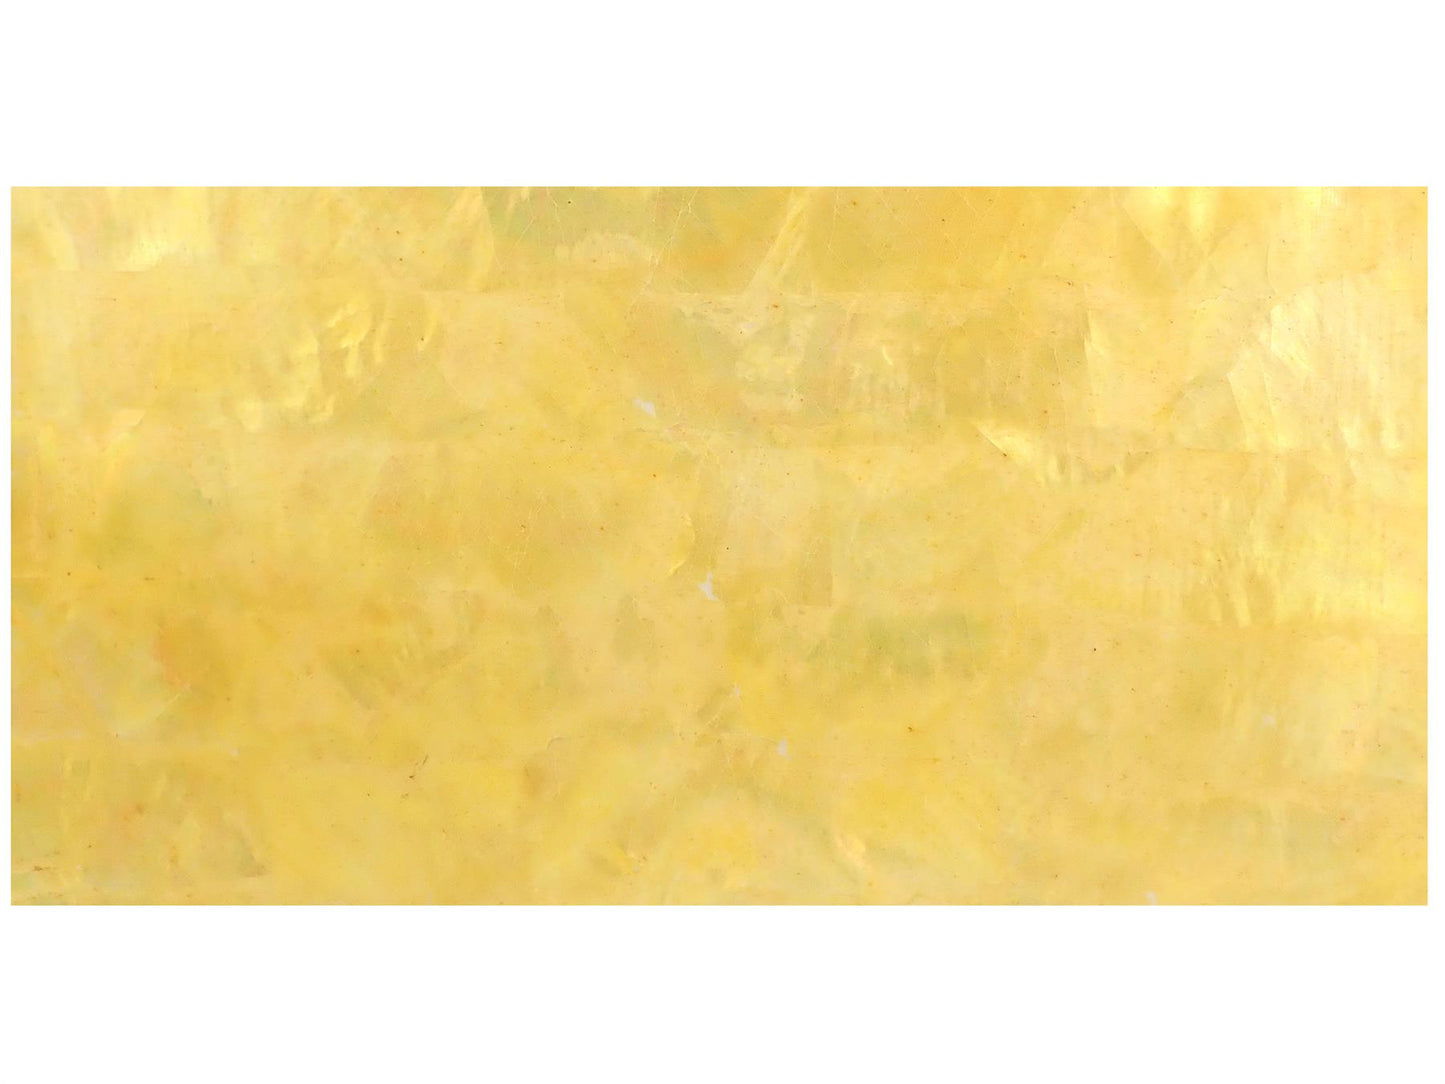 Incudo Light Gold Gold Mother of Pearl Flexible Self-Adhesive Shell Veneer - 240x140x0.3mm